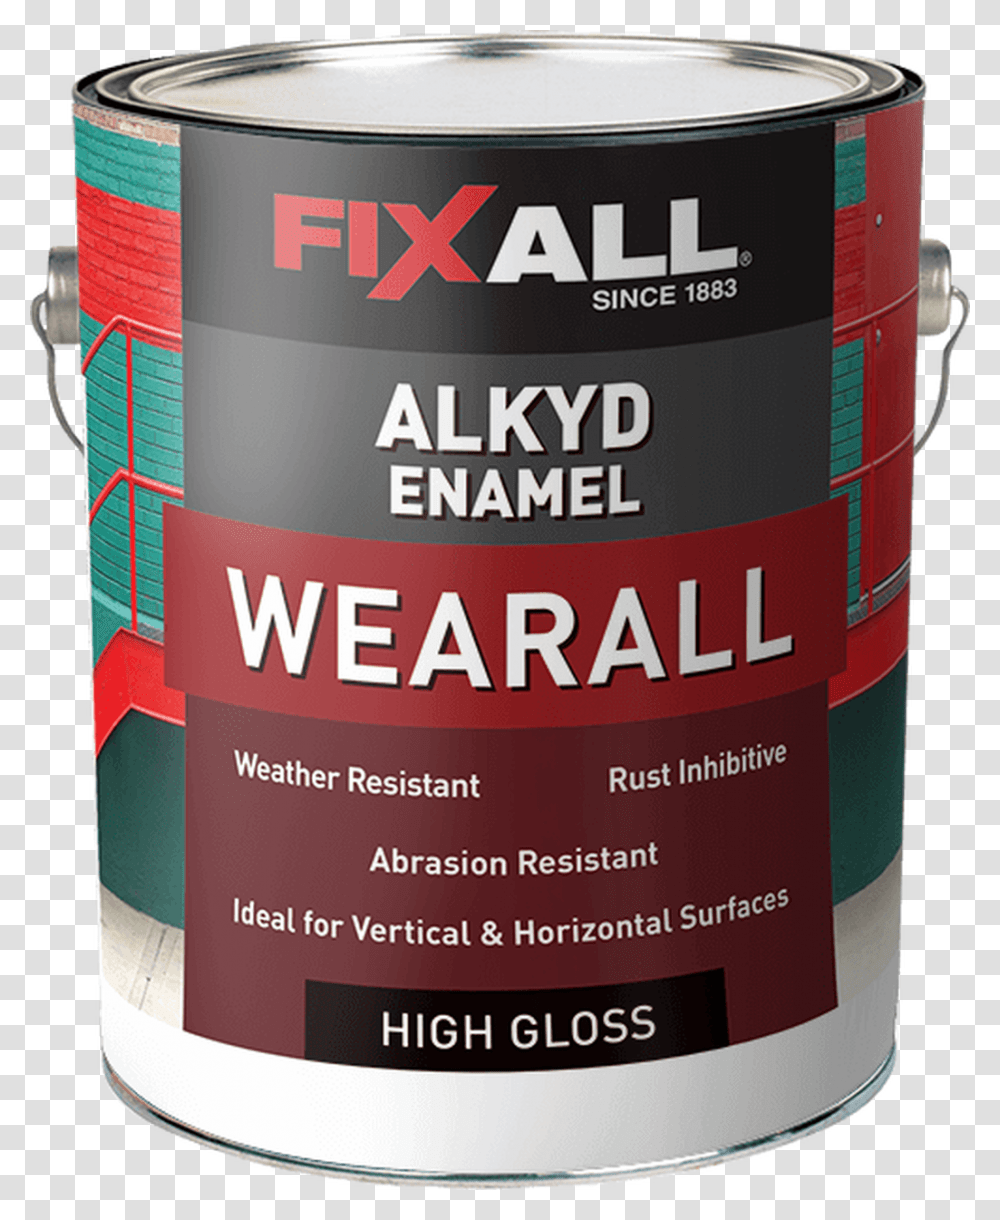 Fixall Wearall Aluminum Alkyd Enamel High Gloss Gallon, Paint Container, Tin, Can, Barrel Transparent Png